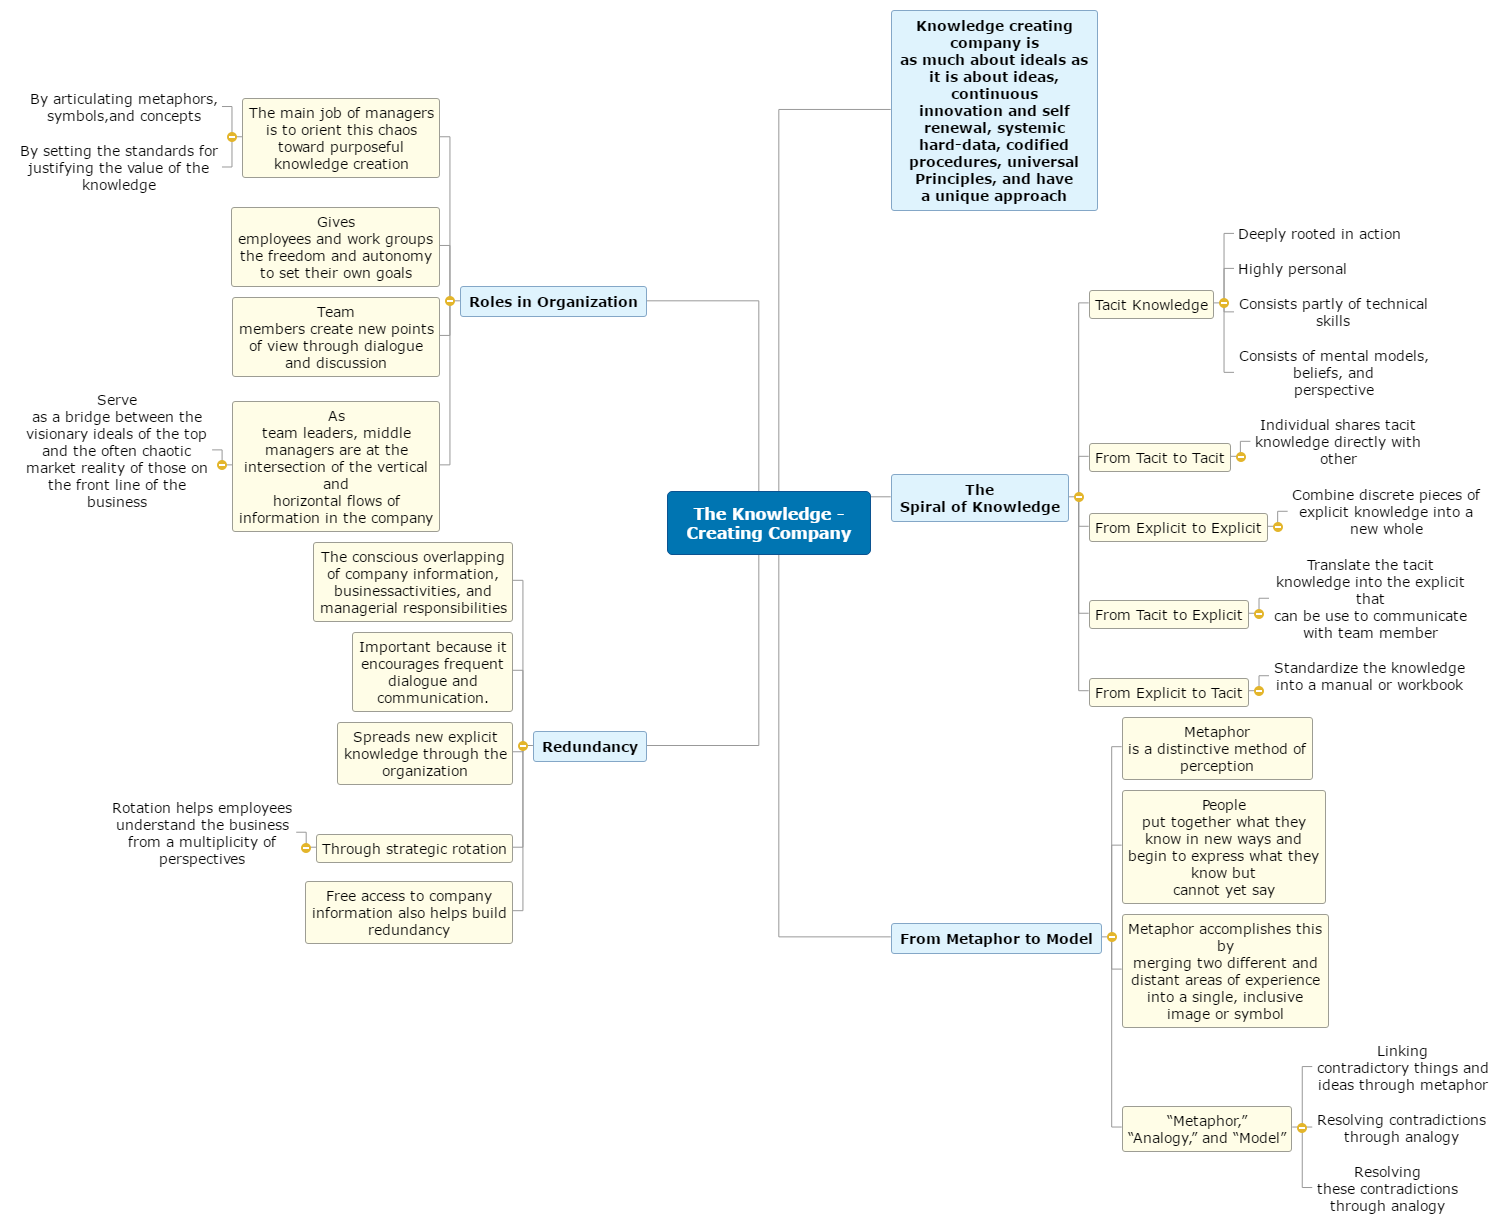 The Knowledge - Creating Company Mind Map